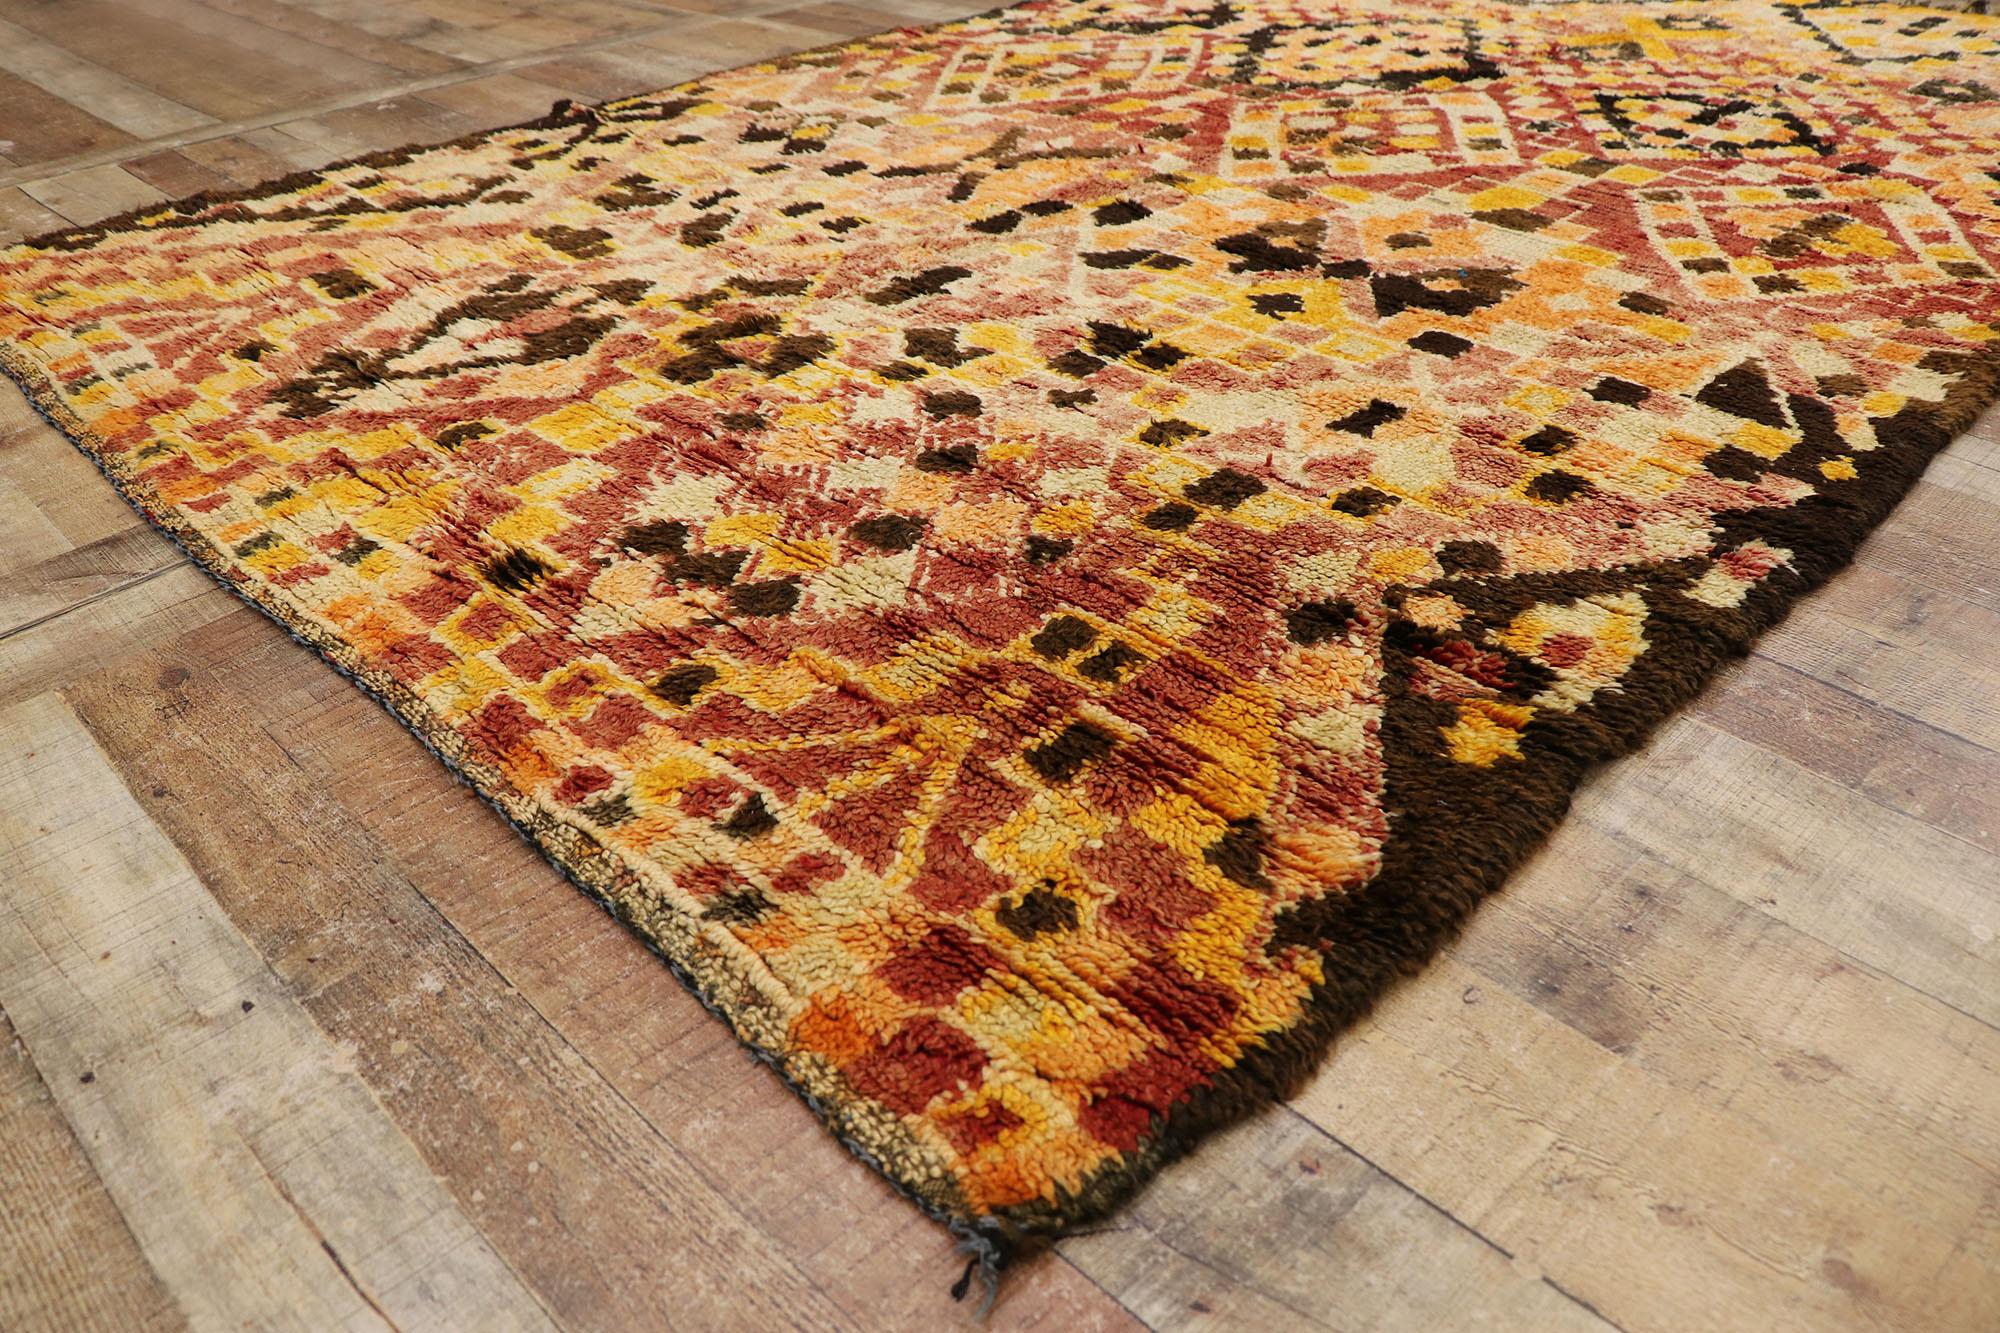 20th Century Vintage Beni MGuild Moroccan Rug, Global Style Meets Eclectic Boho Chic For Sale